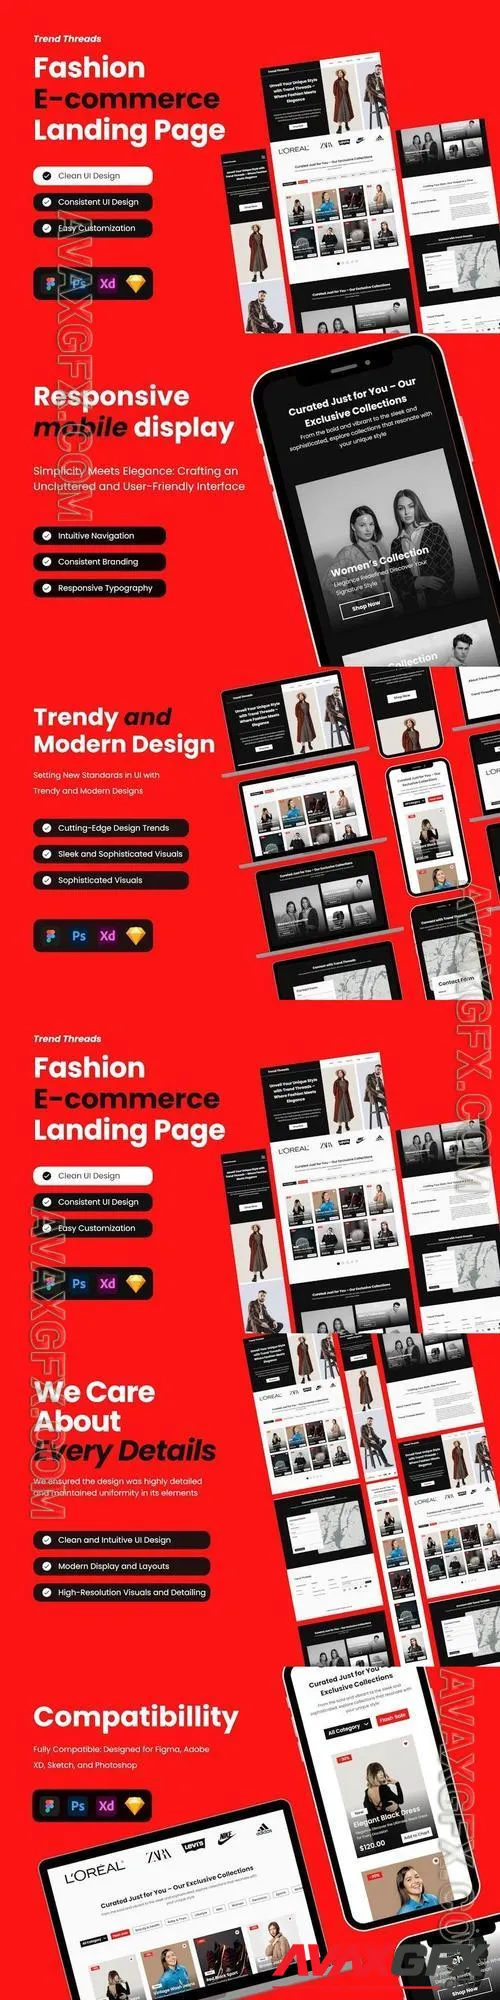 Trend Threads - Fashion E-commerce Landing Page